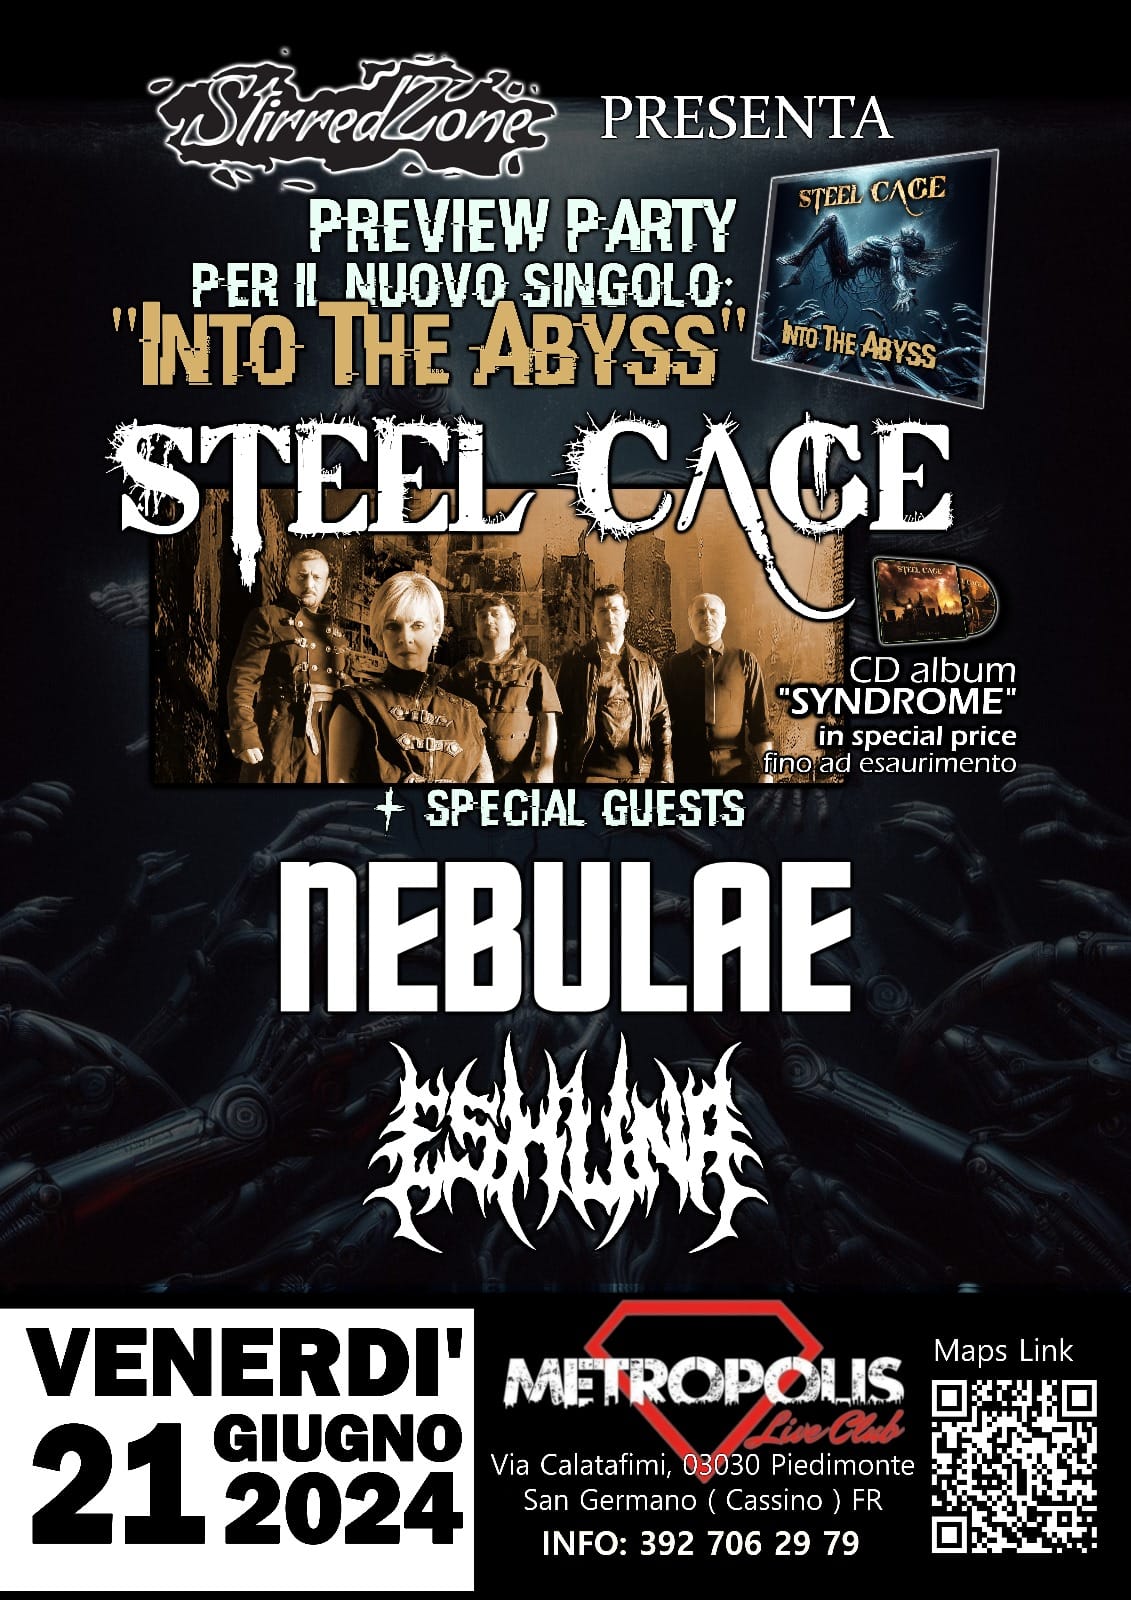 Steel Cage: in anteprima il nuovo singolo “Into The Abyss” live.